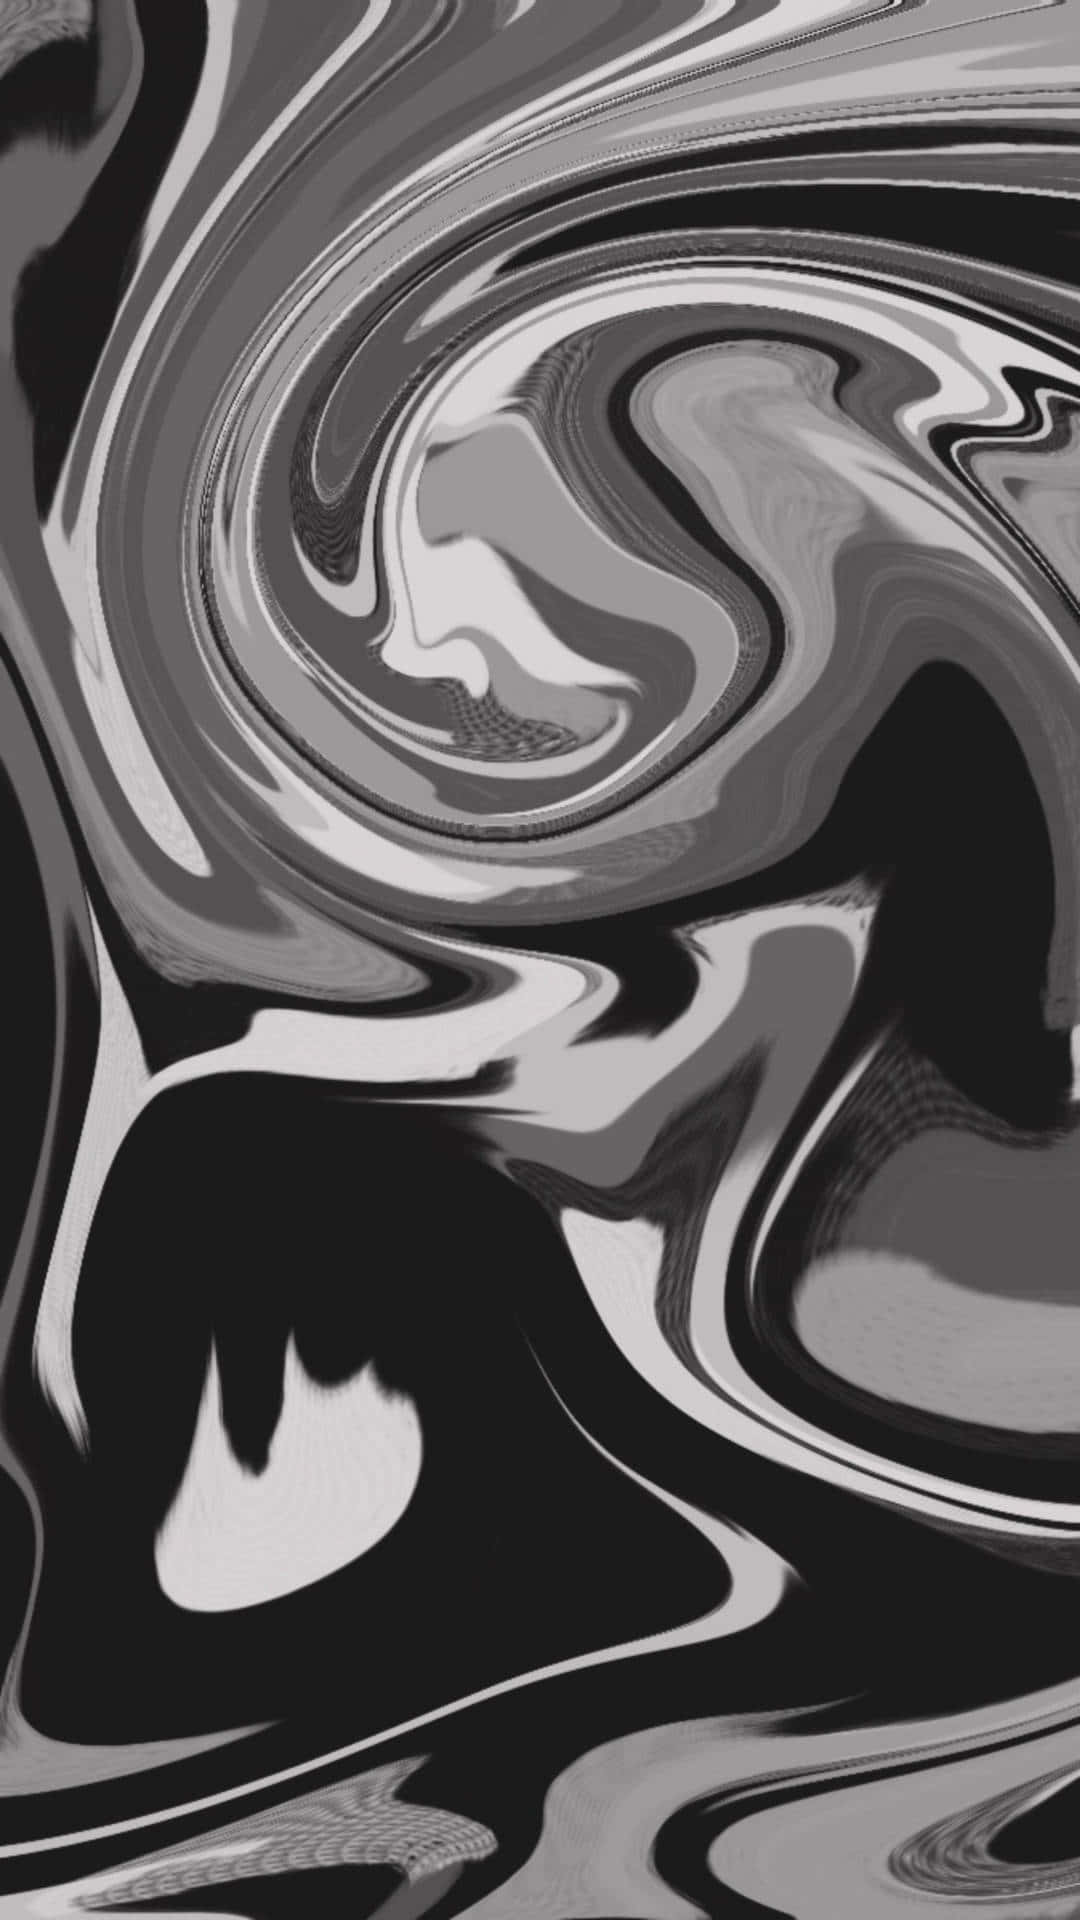 Abstract Black And Grey Swirls